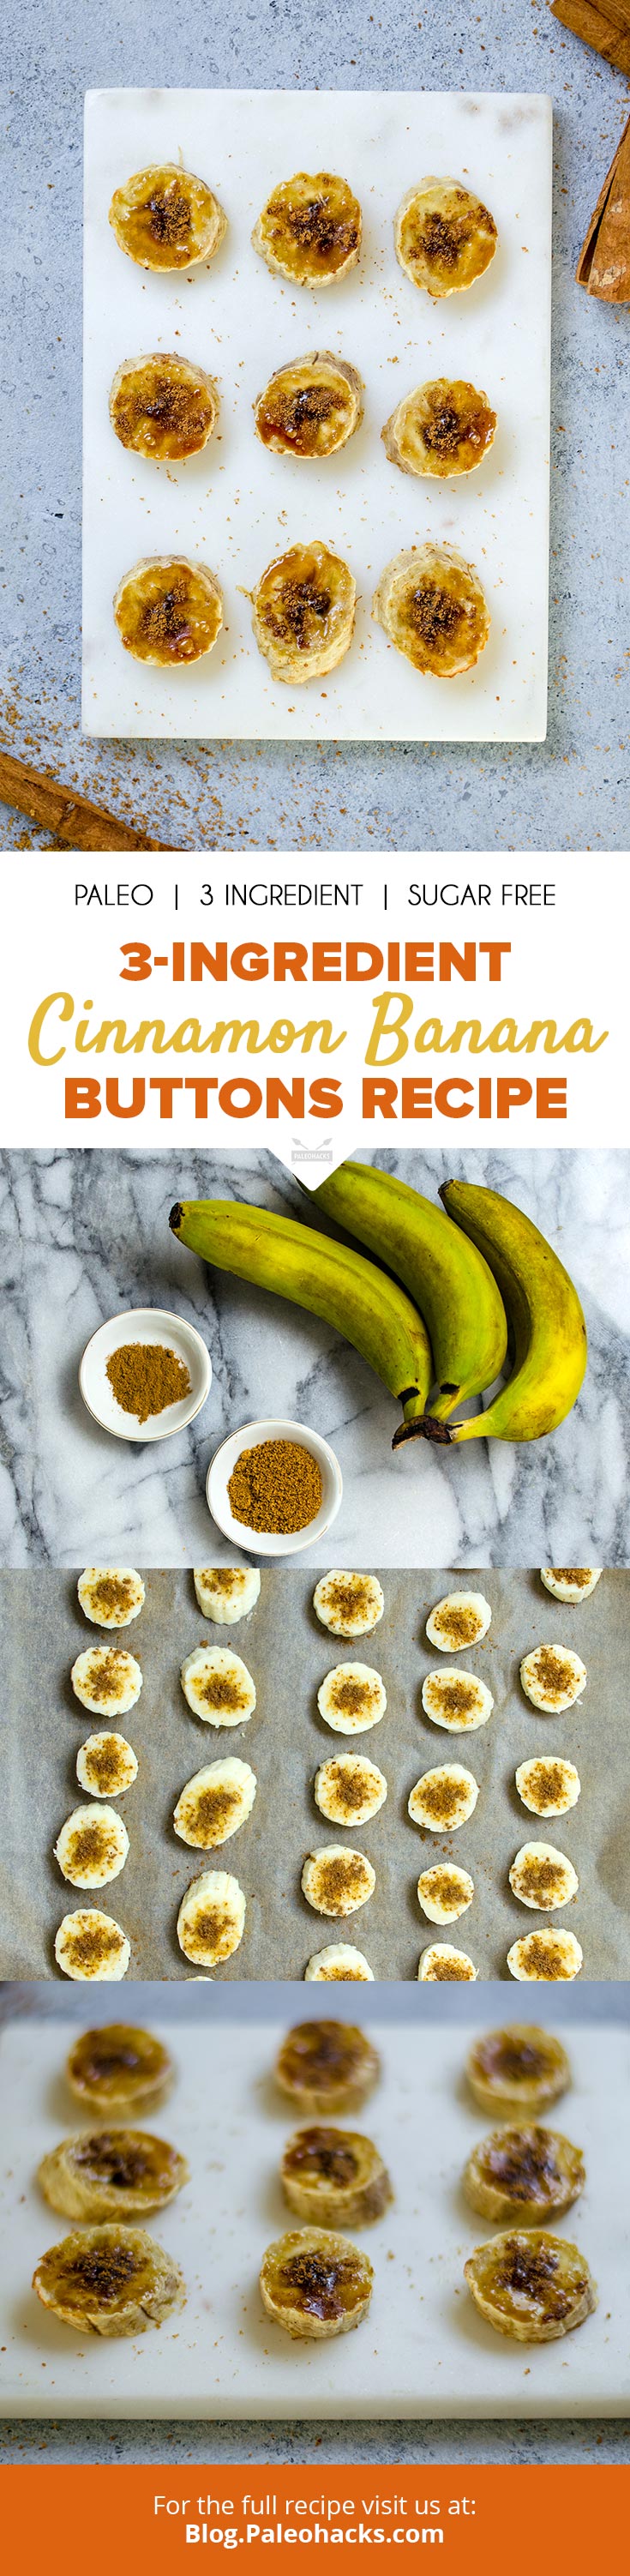 Looking for an easy, healthy snack? These baked banana buttons are a sweet and unexpectedly crispy treat.